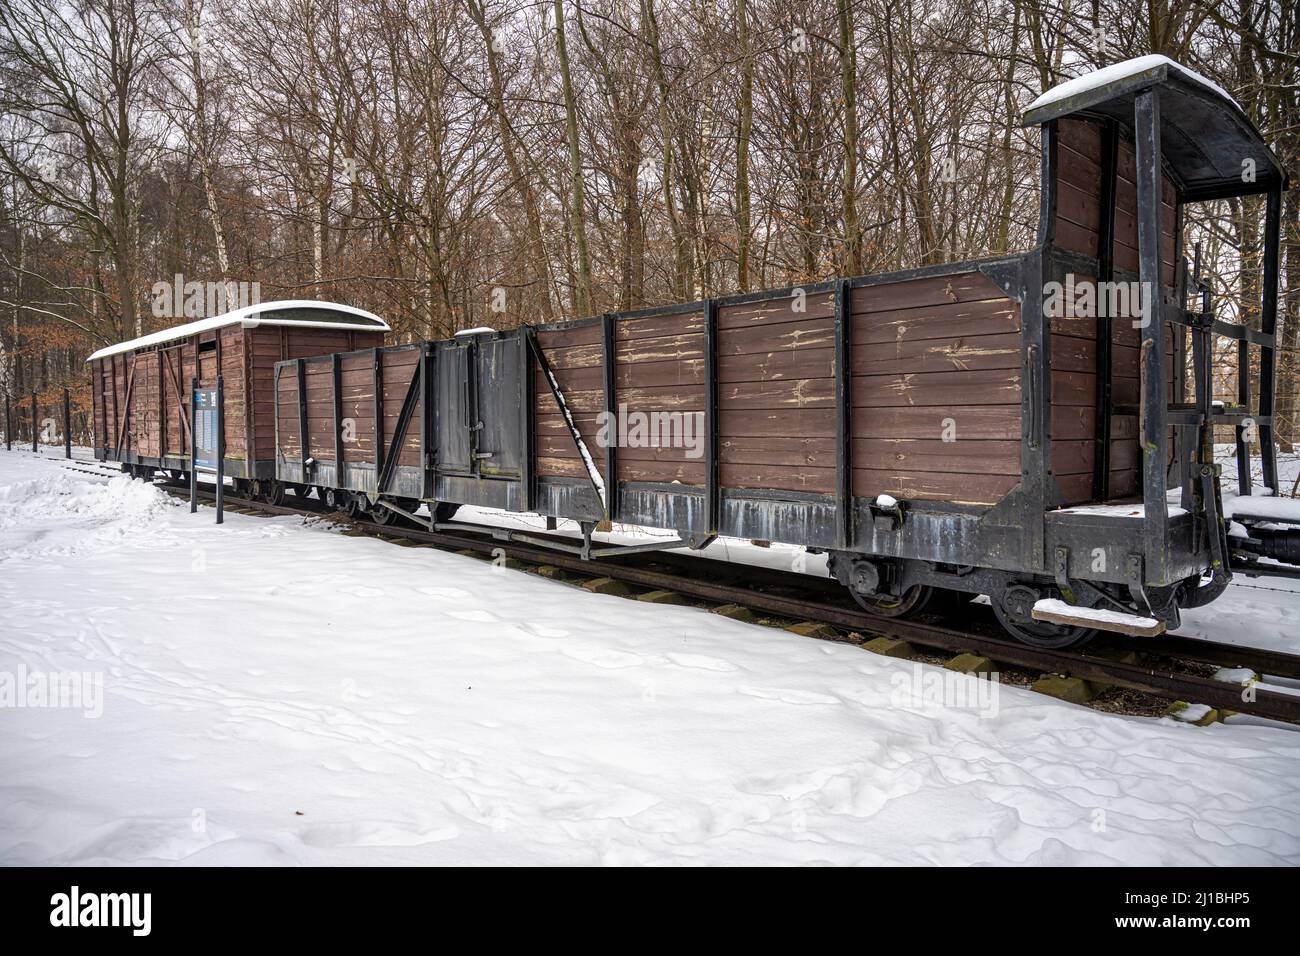 December 30, 2021 - Stutthof, Poland: A Holocaust Train at the Nazi Concentration Camp Stutthof. It's estimated that between 62.000 - 65.000 died between 1939 and 1945 in this camp Stock Photo